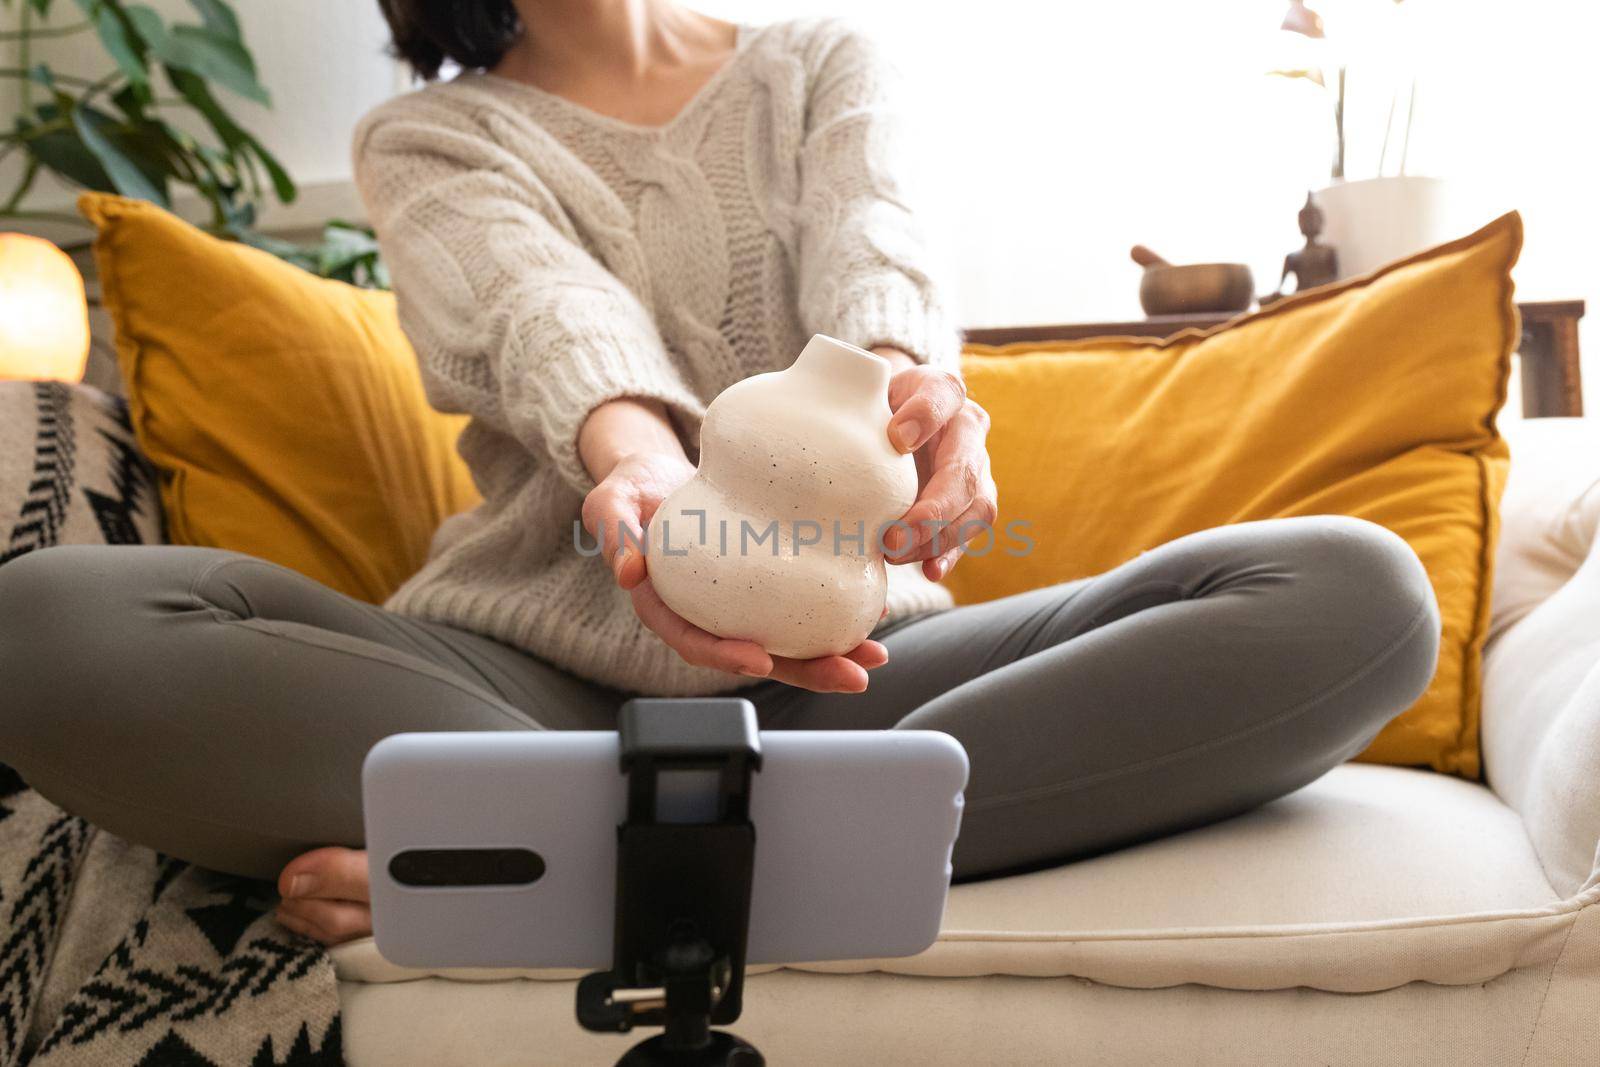 Unrecognizable young woman showing handmade artisan ceramic vase during video call with mobile phone. Technology concept